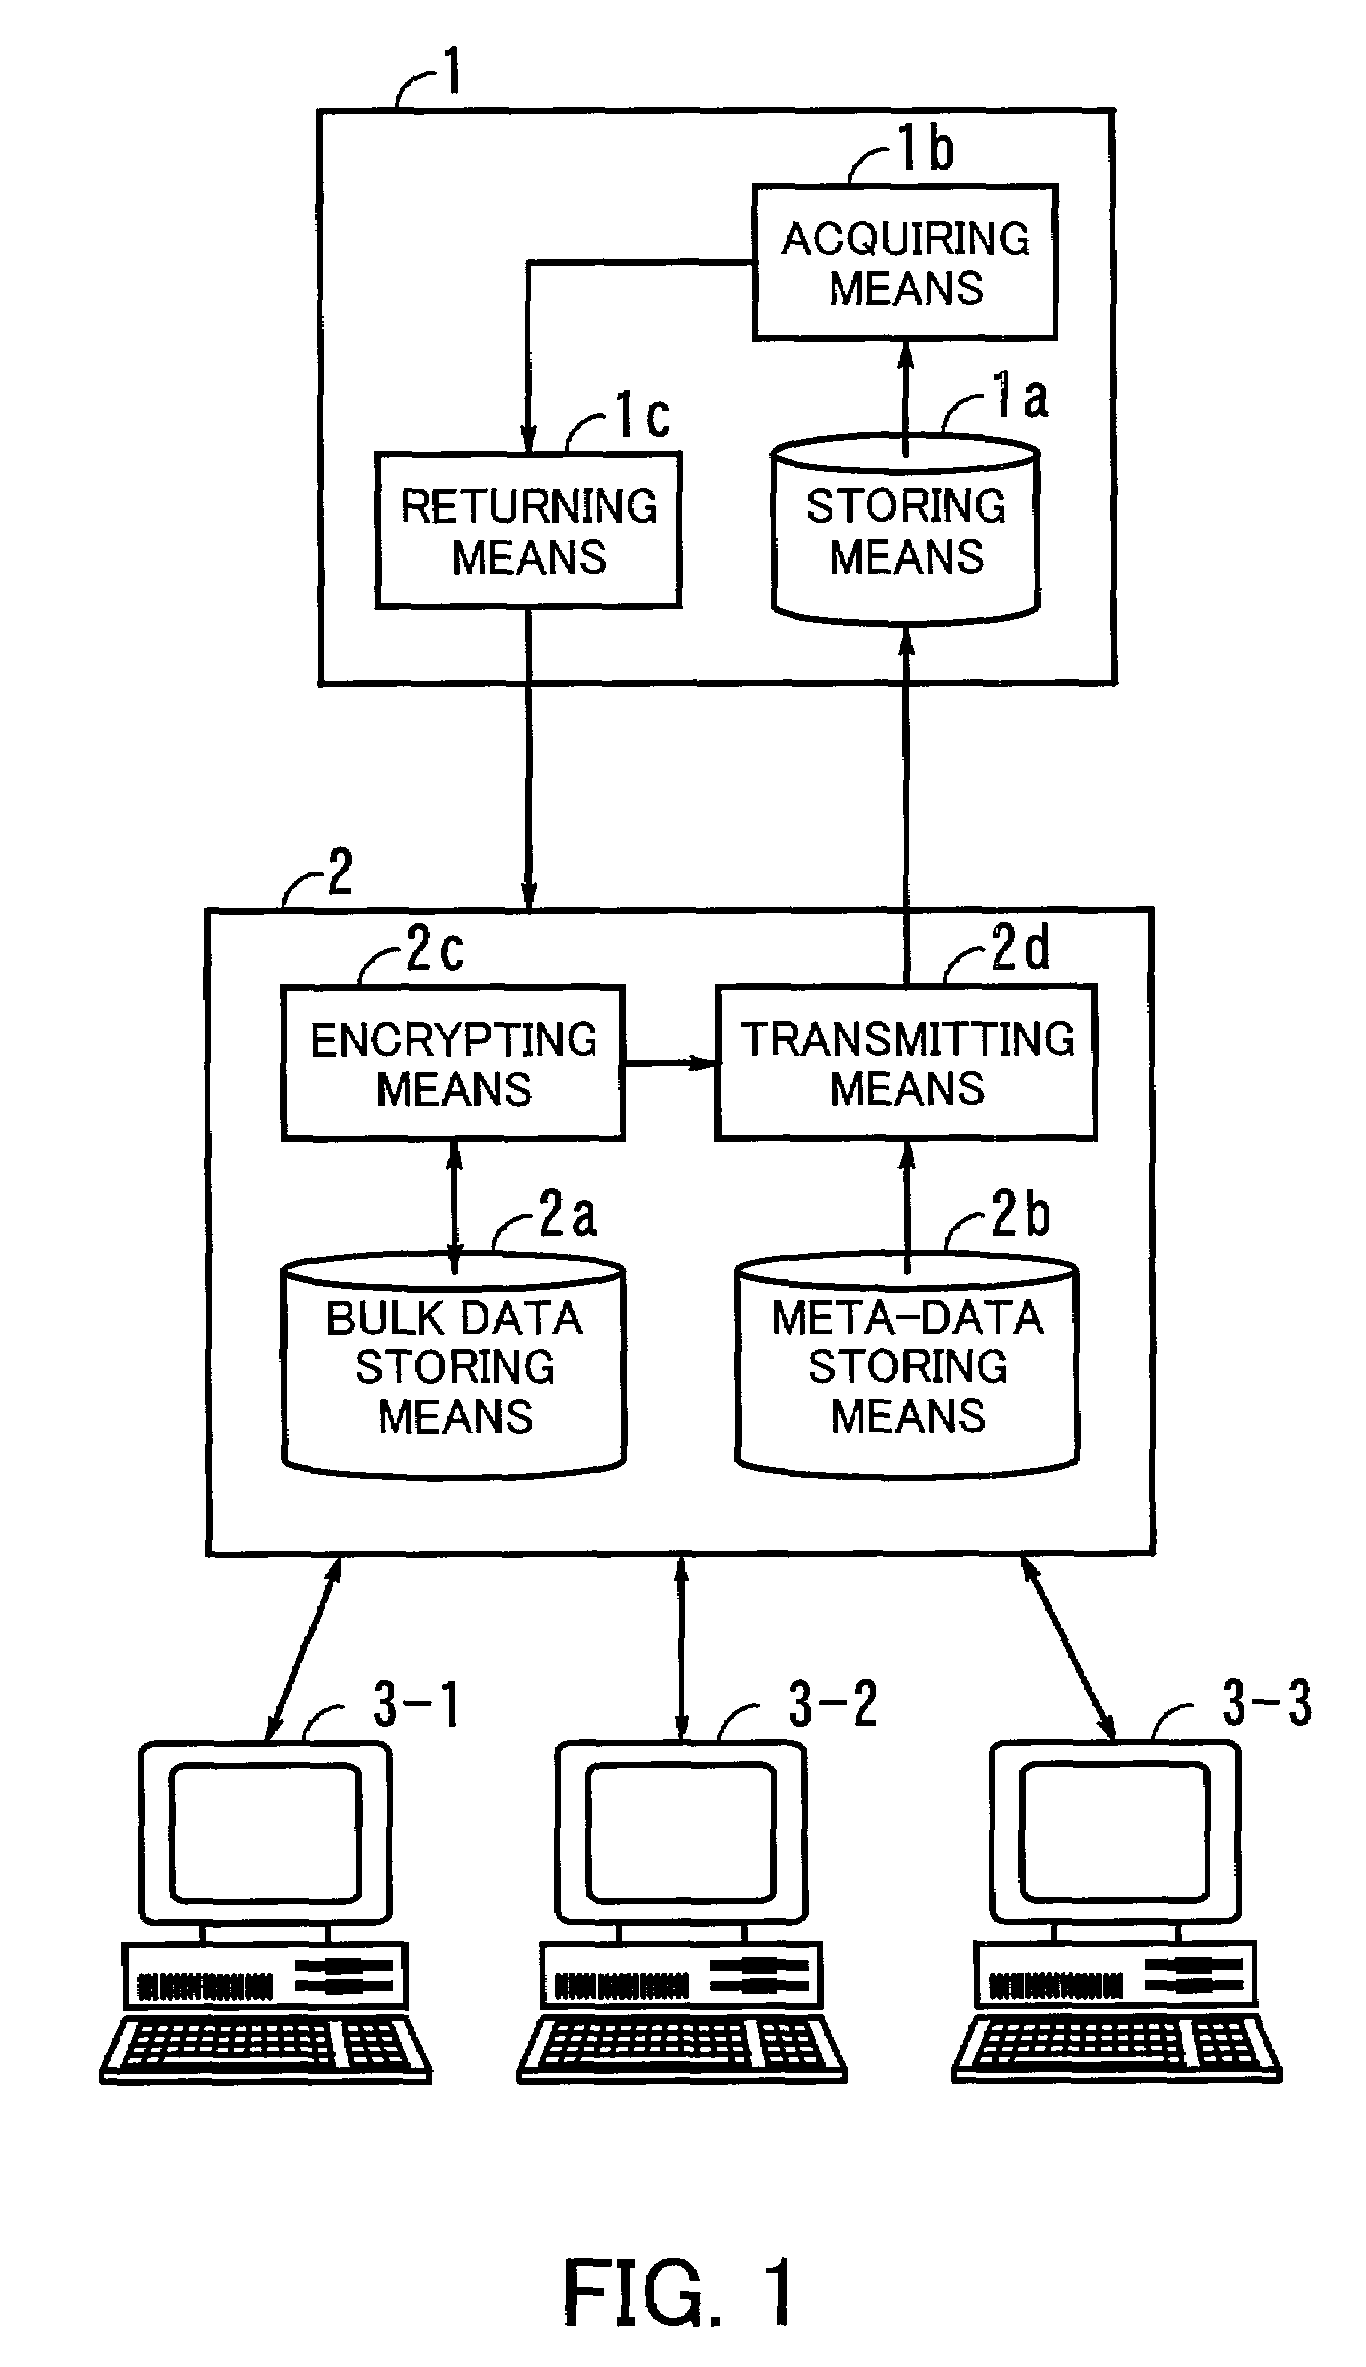 Model management system and apparatus